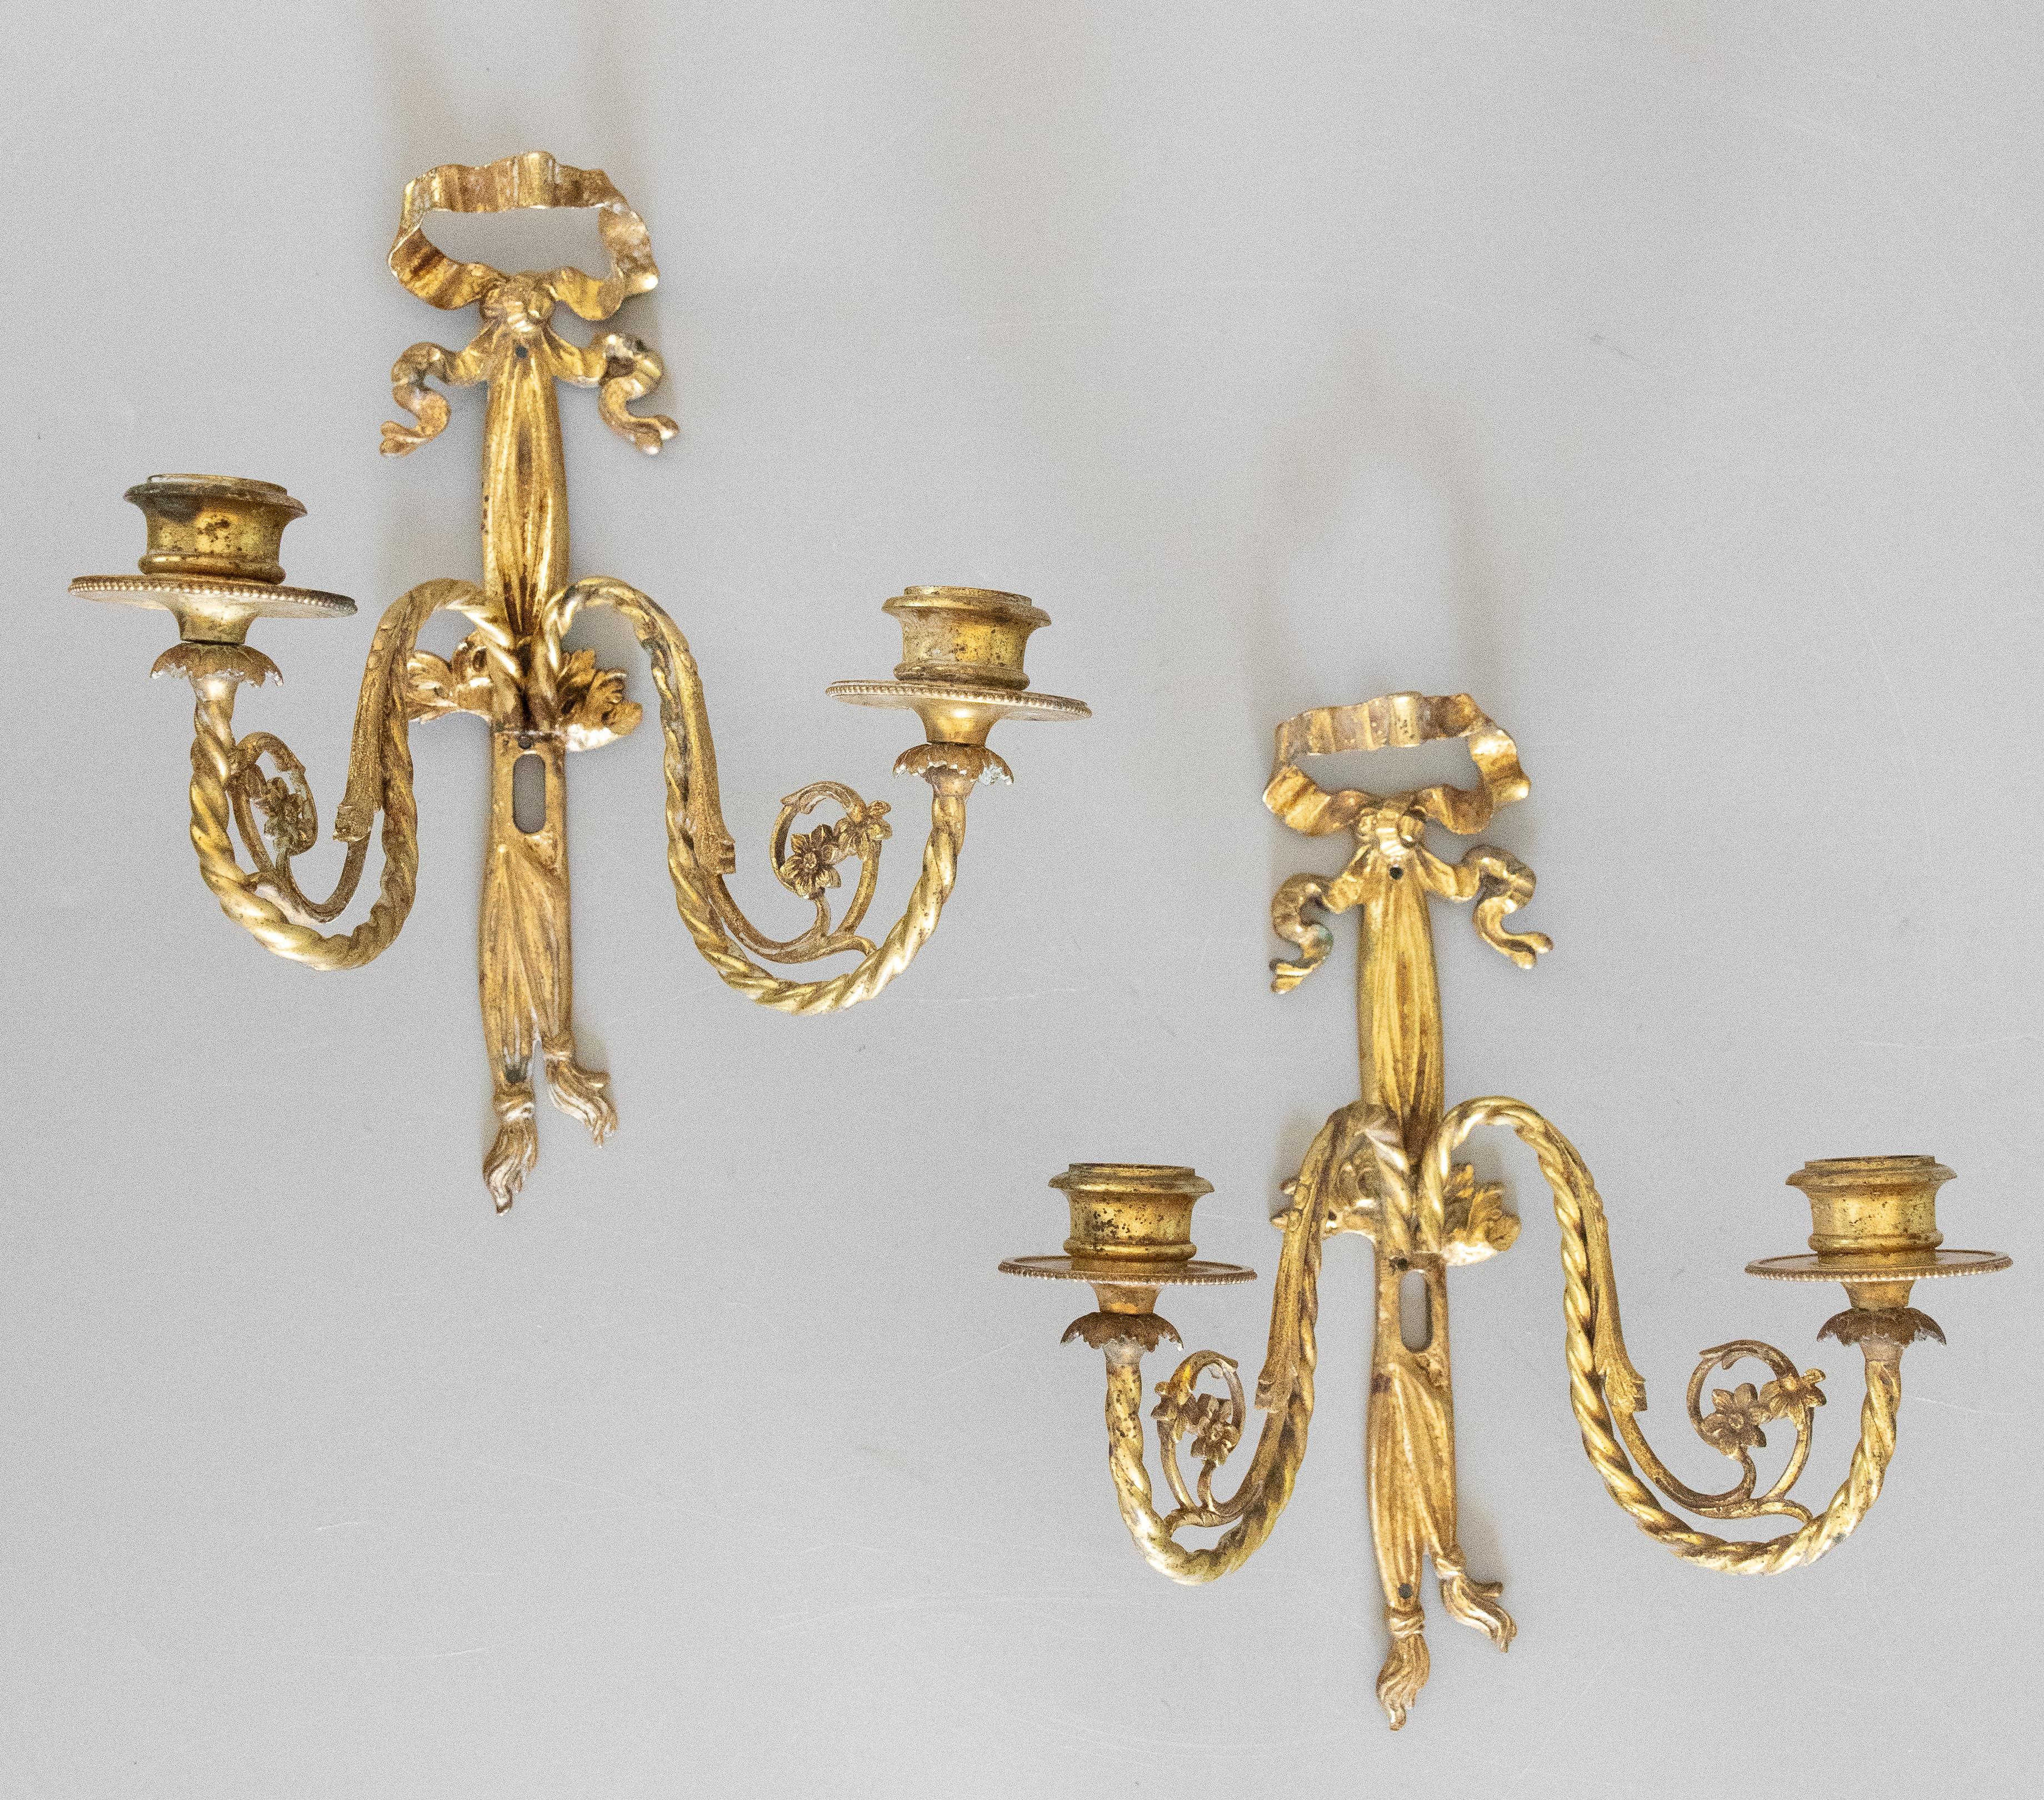 A gorgeous pair of antique early 20th-Century French Louis XVI style gilded bronze two arm candle wall sconces, sourced in Paris. These beautiful sconces are decorated with gilt twisted arms, flowers, bows and ribbons with tassels in a lovely gilt